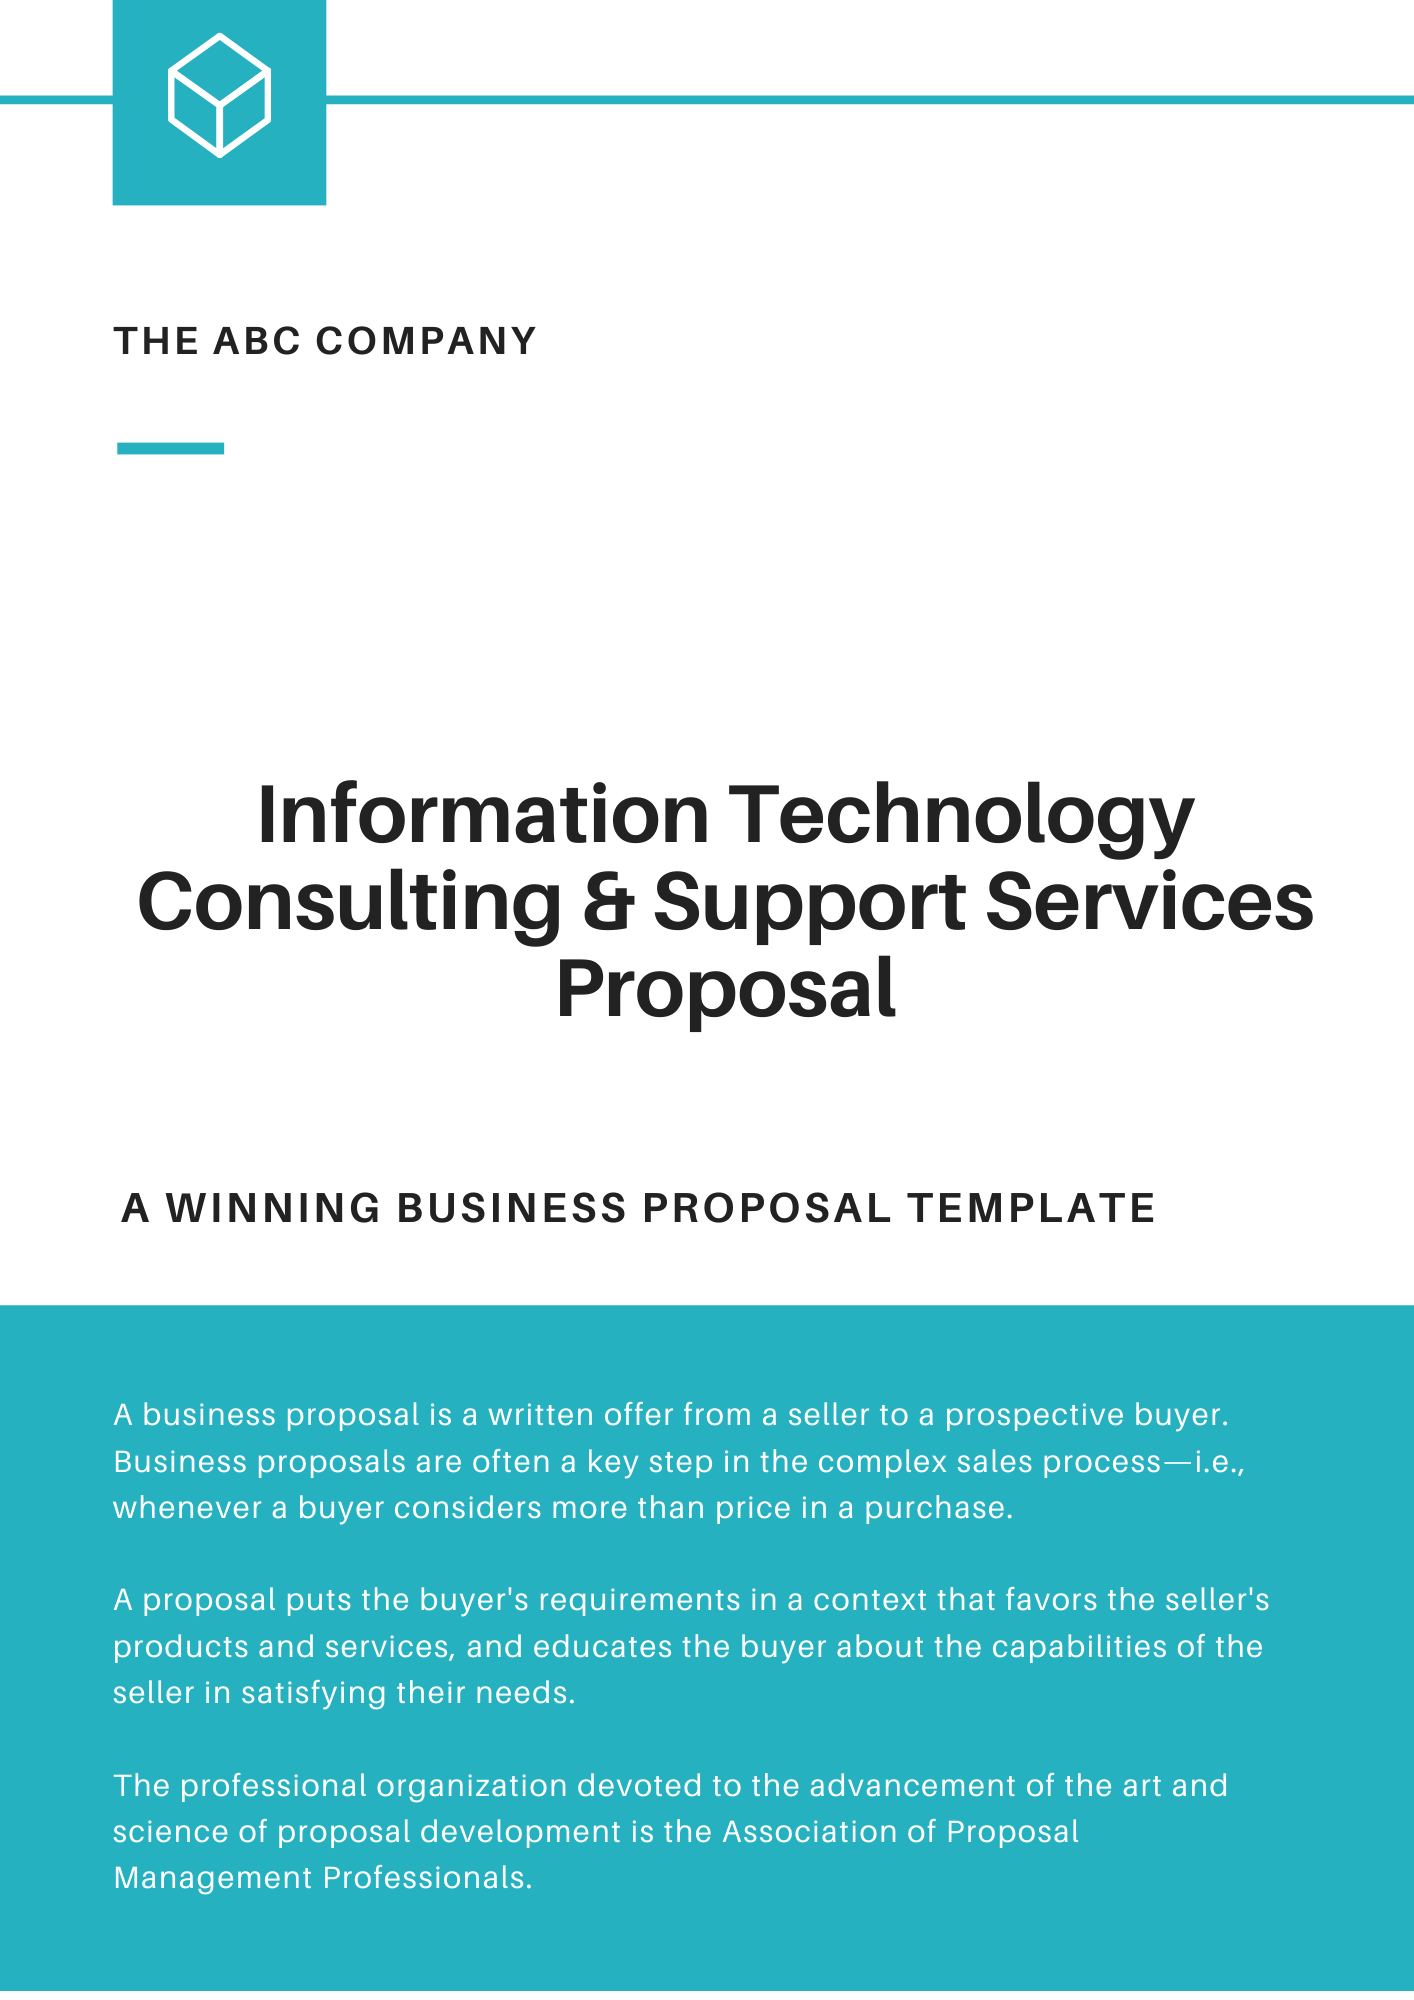 Information Technology Consulting & Support Services Proposal Template Within Technology Proposal Template